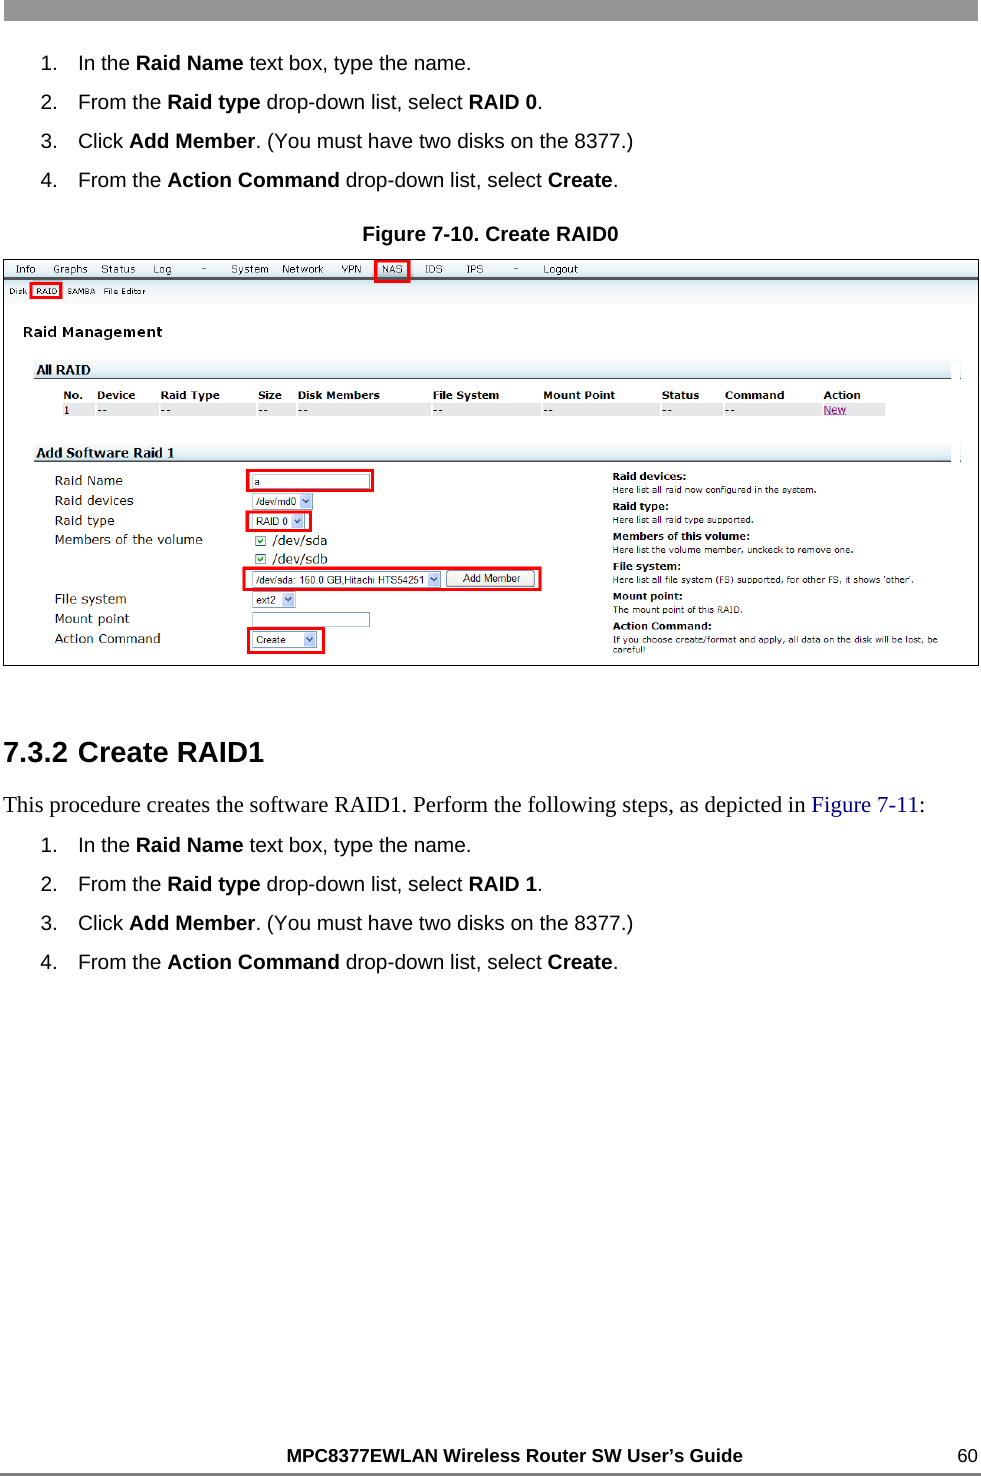                                                          MPC8377EWLAN Wireless Router SW User’s Guide    60 1. In the Raid Name text box, type the name. 2. From the Raid type drop-down list, select RAID 0. 3. Click Add Member. (You must have two disks on the 8377.) 4. From the Action Command drop-down list, select Create. Figure 7-10. Create RAID0  7.3.2 Create RAID1 This procedure creates the software RAID1. Perform the following steps, as depicted in Figure 7-11: 1. In the Raid Name text box, type the name. 2. From the Raid type drop-down list, select RAID 1. 3. Click Add Member. (You must have two disks on the 8377.) 4. From the Action Command drop-down list, select Create. 